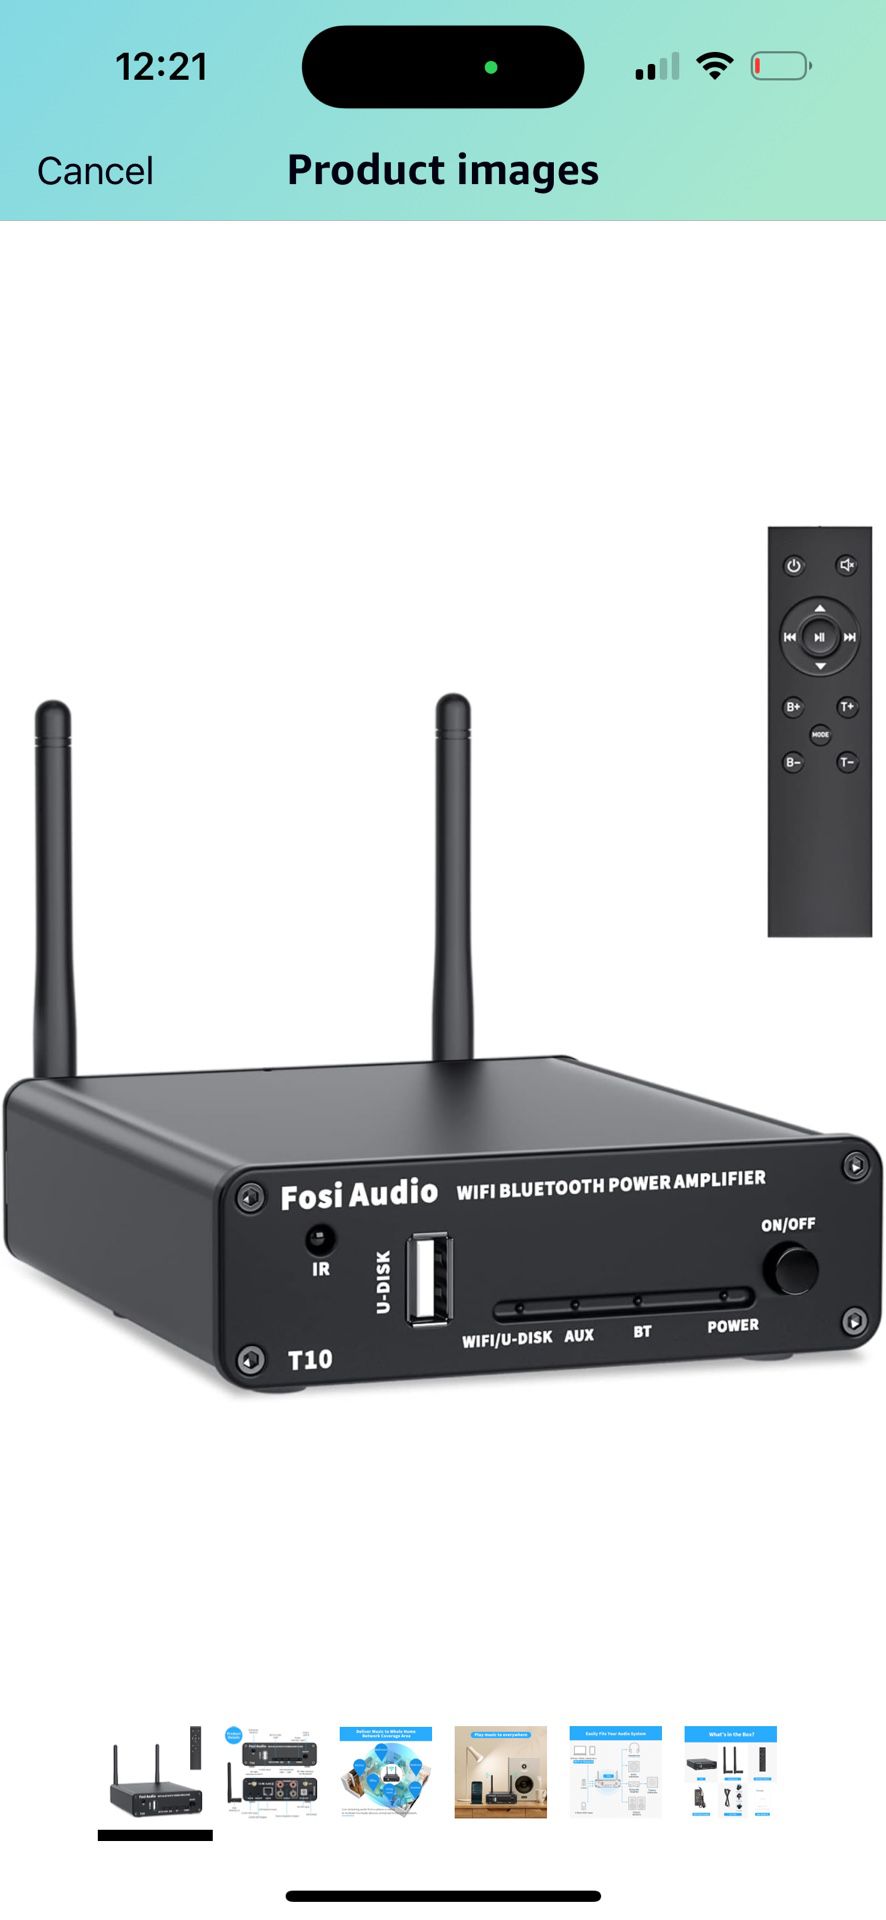 Fosi Audio T10 2.1CH WiFi(Support Airplay 1 and Spotify) TPA3116 Bluetooth 5.0 Stereo Receiver Amplifier 24bit 192 kHz 2.4G Wi-Fi Routing Module Wirel